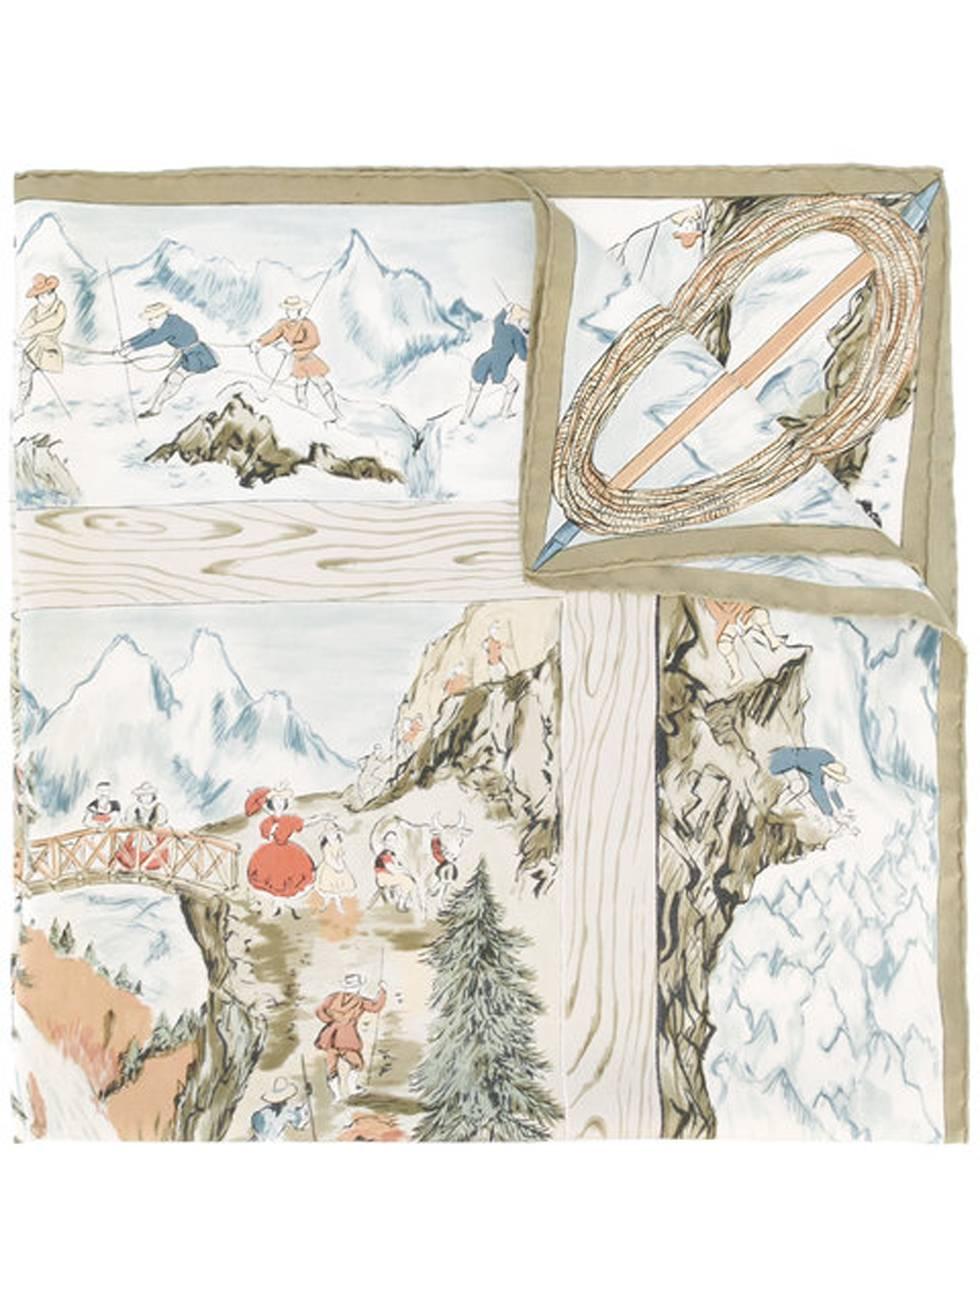 1946s Hermes Rarity Les Joies De La Montagne silk scarf featuring a mountains scenic print, designed by Jean-Louis Clerc  Circa 1946. This scarf is one of the most famous & rare silk printed scarf from Hermes.
90cm x 90cm
In good vintage